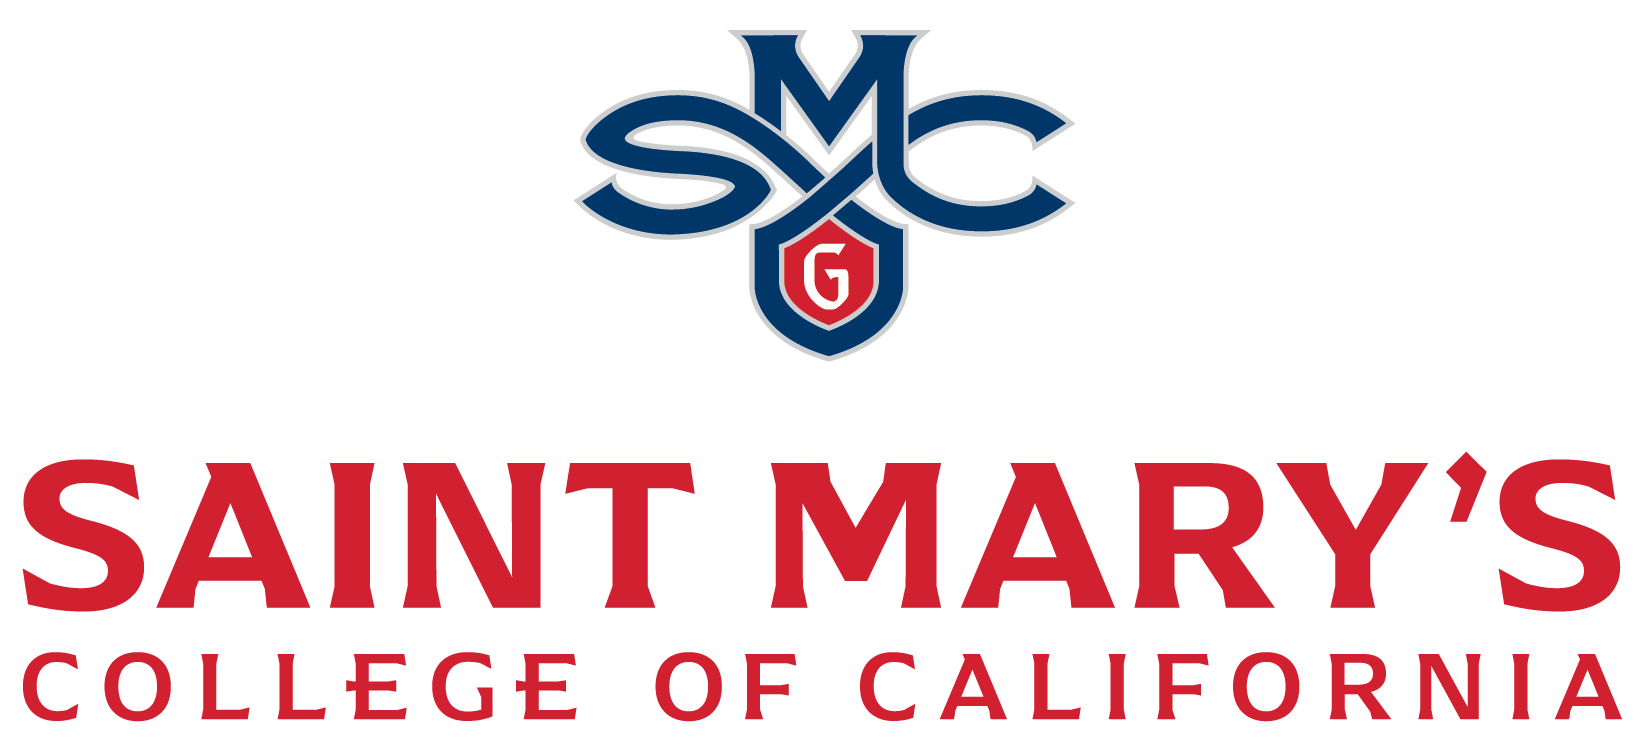 St Mary’s College of California